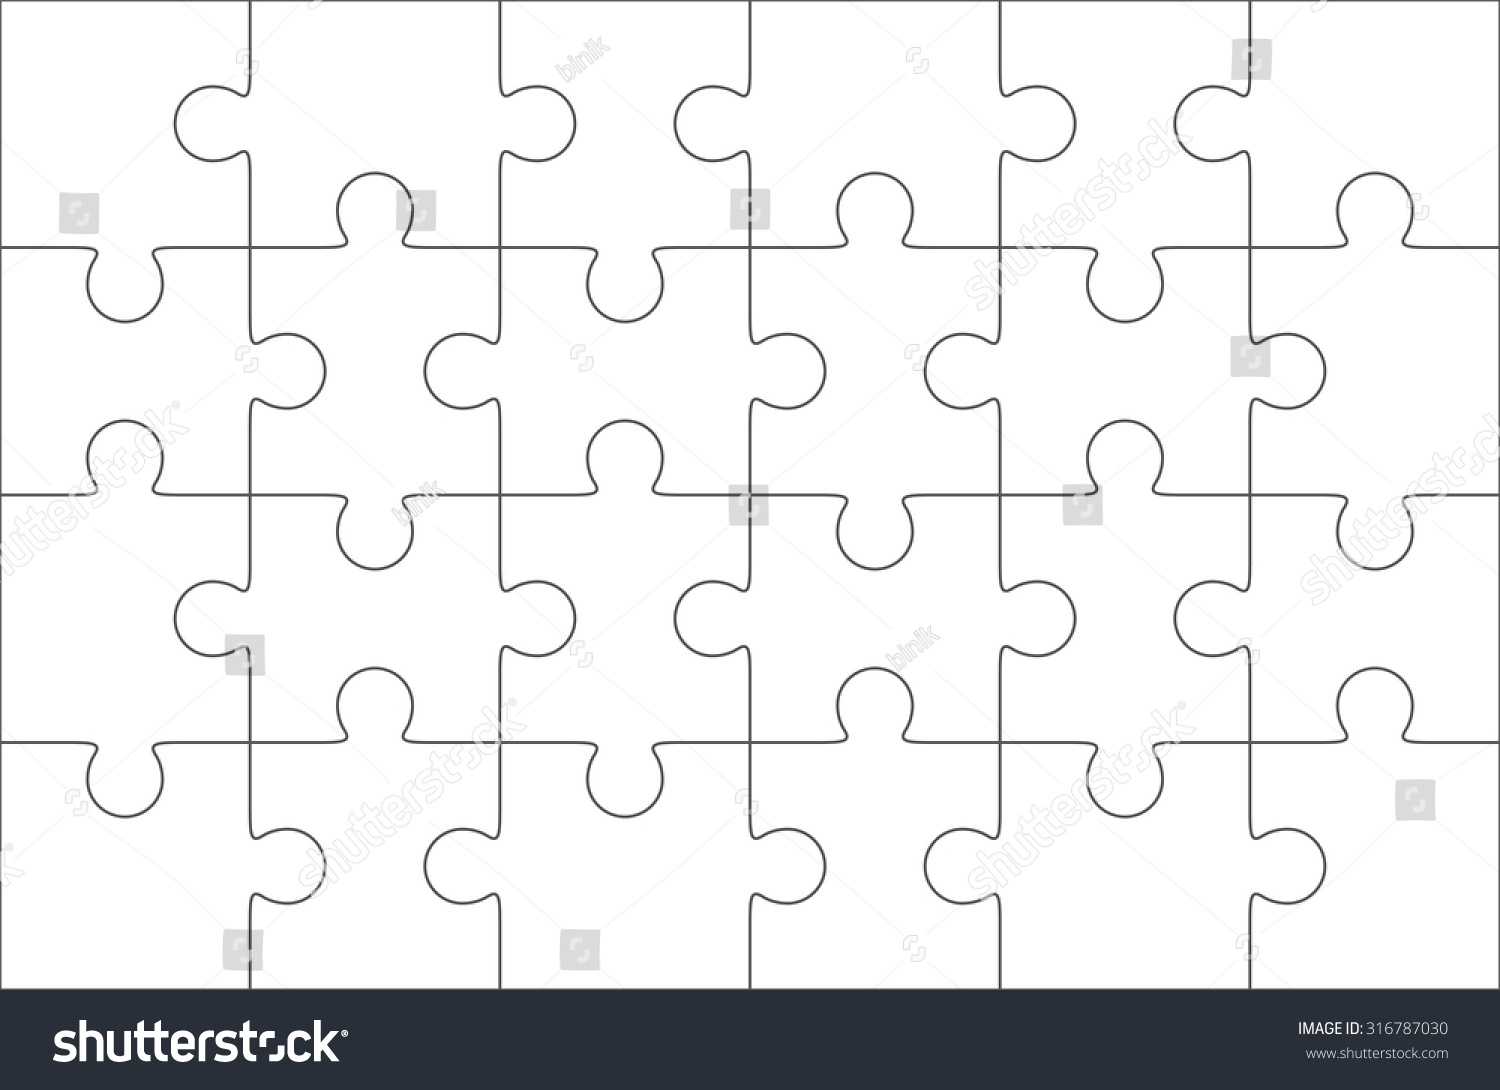 Jigsaw Puzzle Blank Template 6X4 Elements | Royalty Free Throughout Blank Jigsaw Piece Template